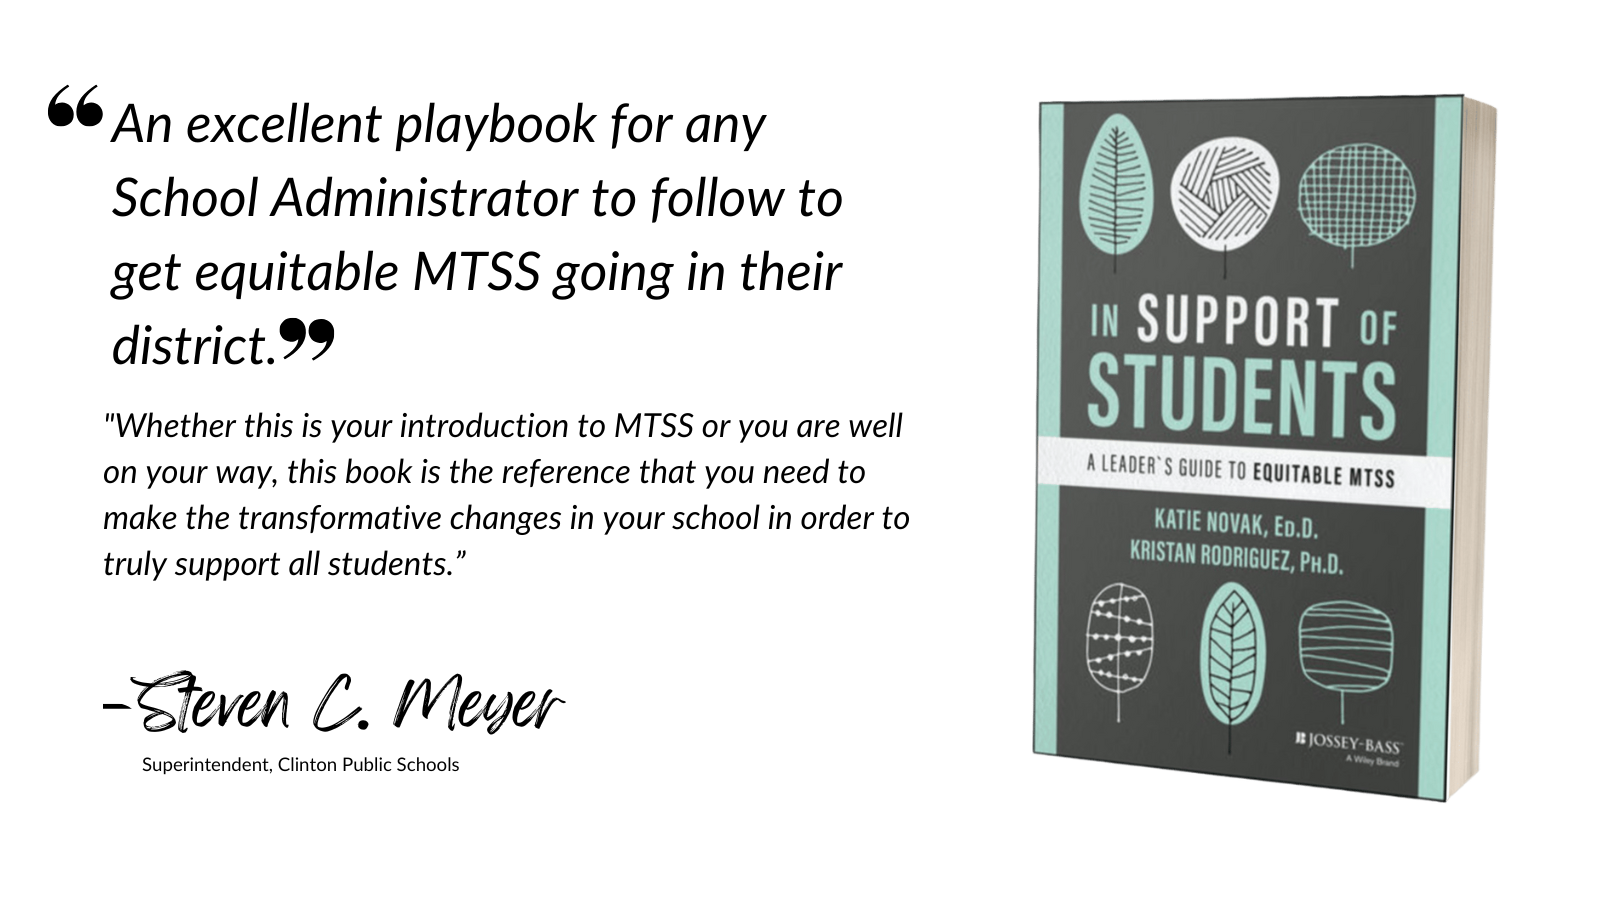 An excellent playbook for any school administrator to follow to get equitable MTSS going in their district"